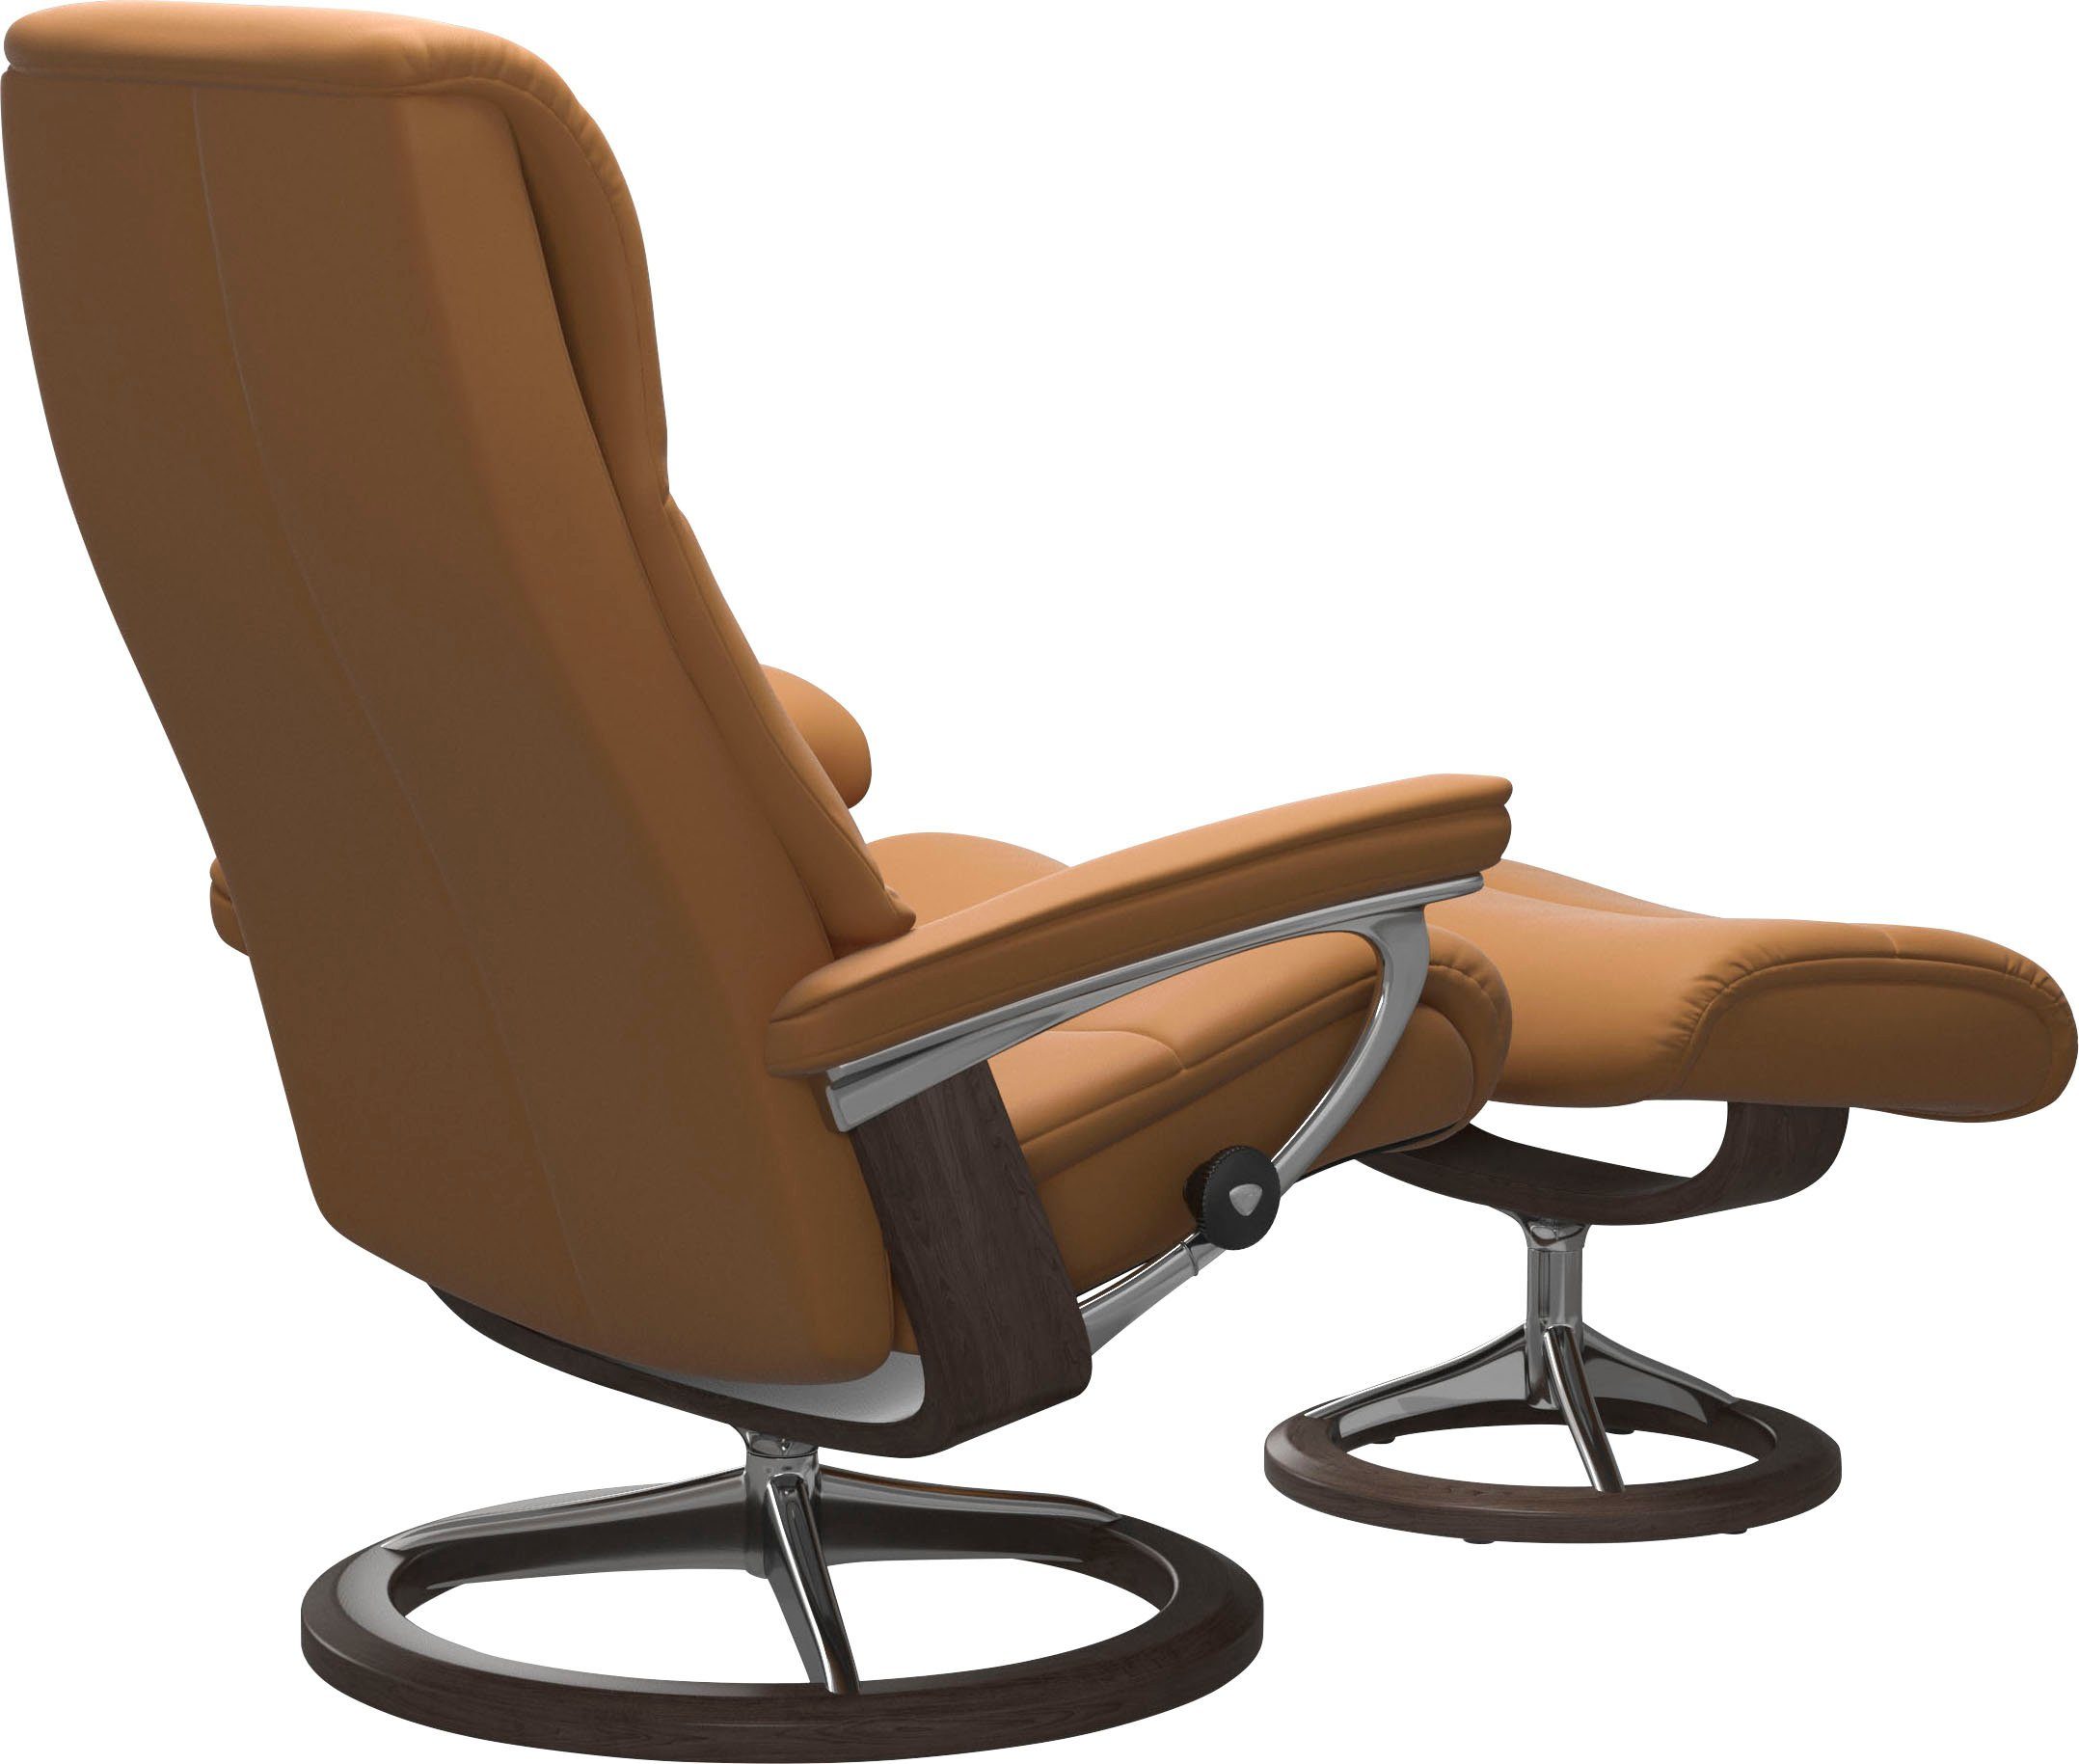 Stressless® Relaxsessel Größe mit S,Gestell Base, Wenge View, Signature